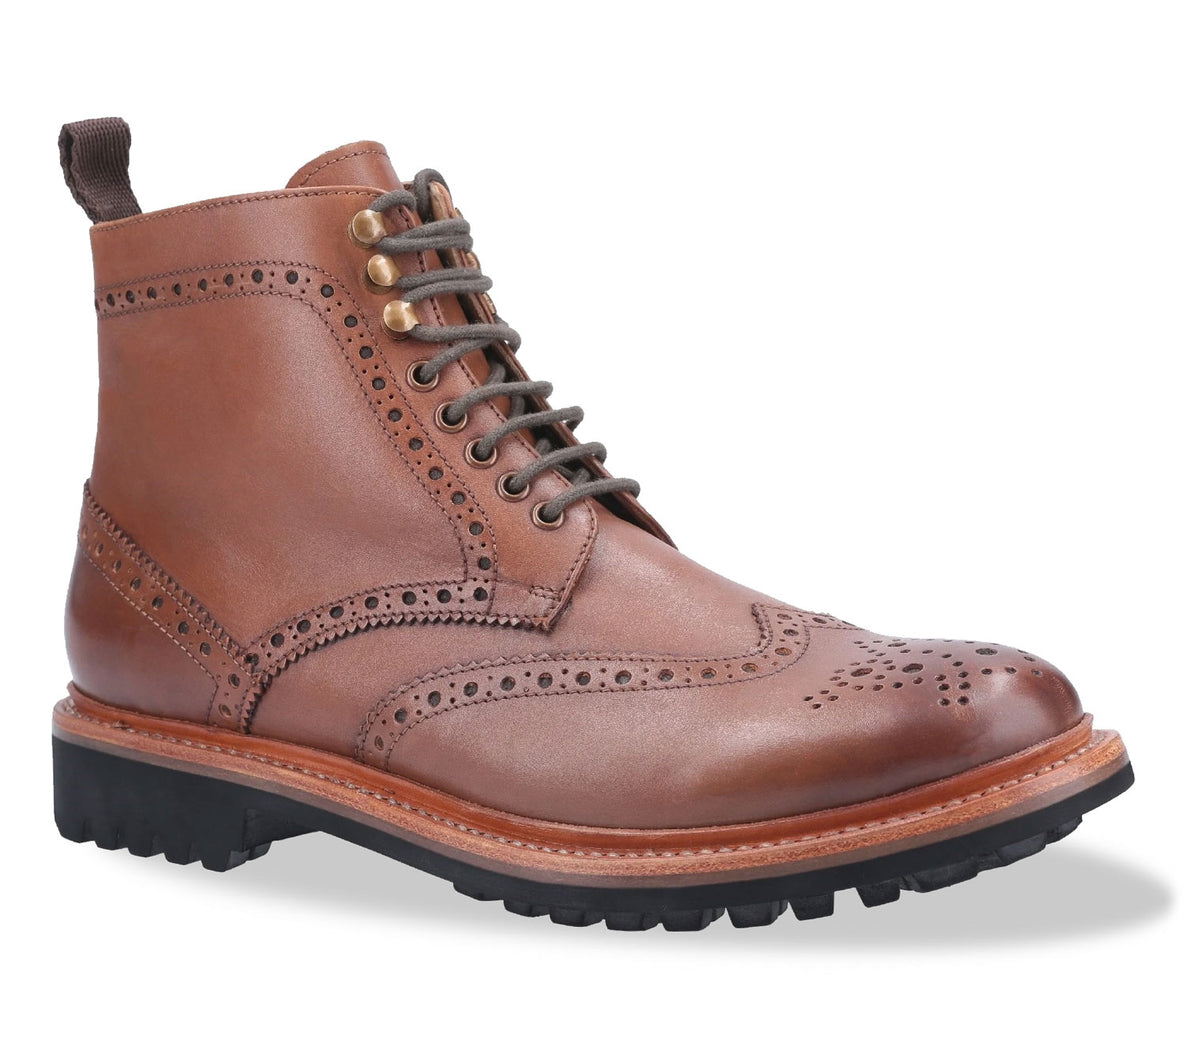 Rissington Goodyear Welt Commando Brogue Lace Up Derby Boot 